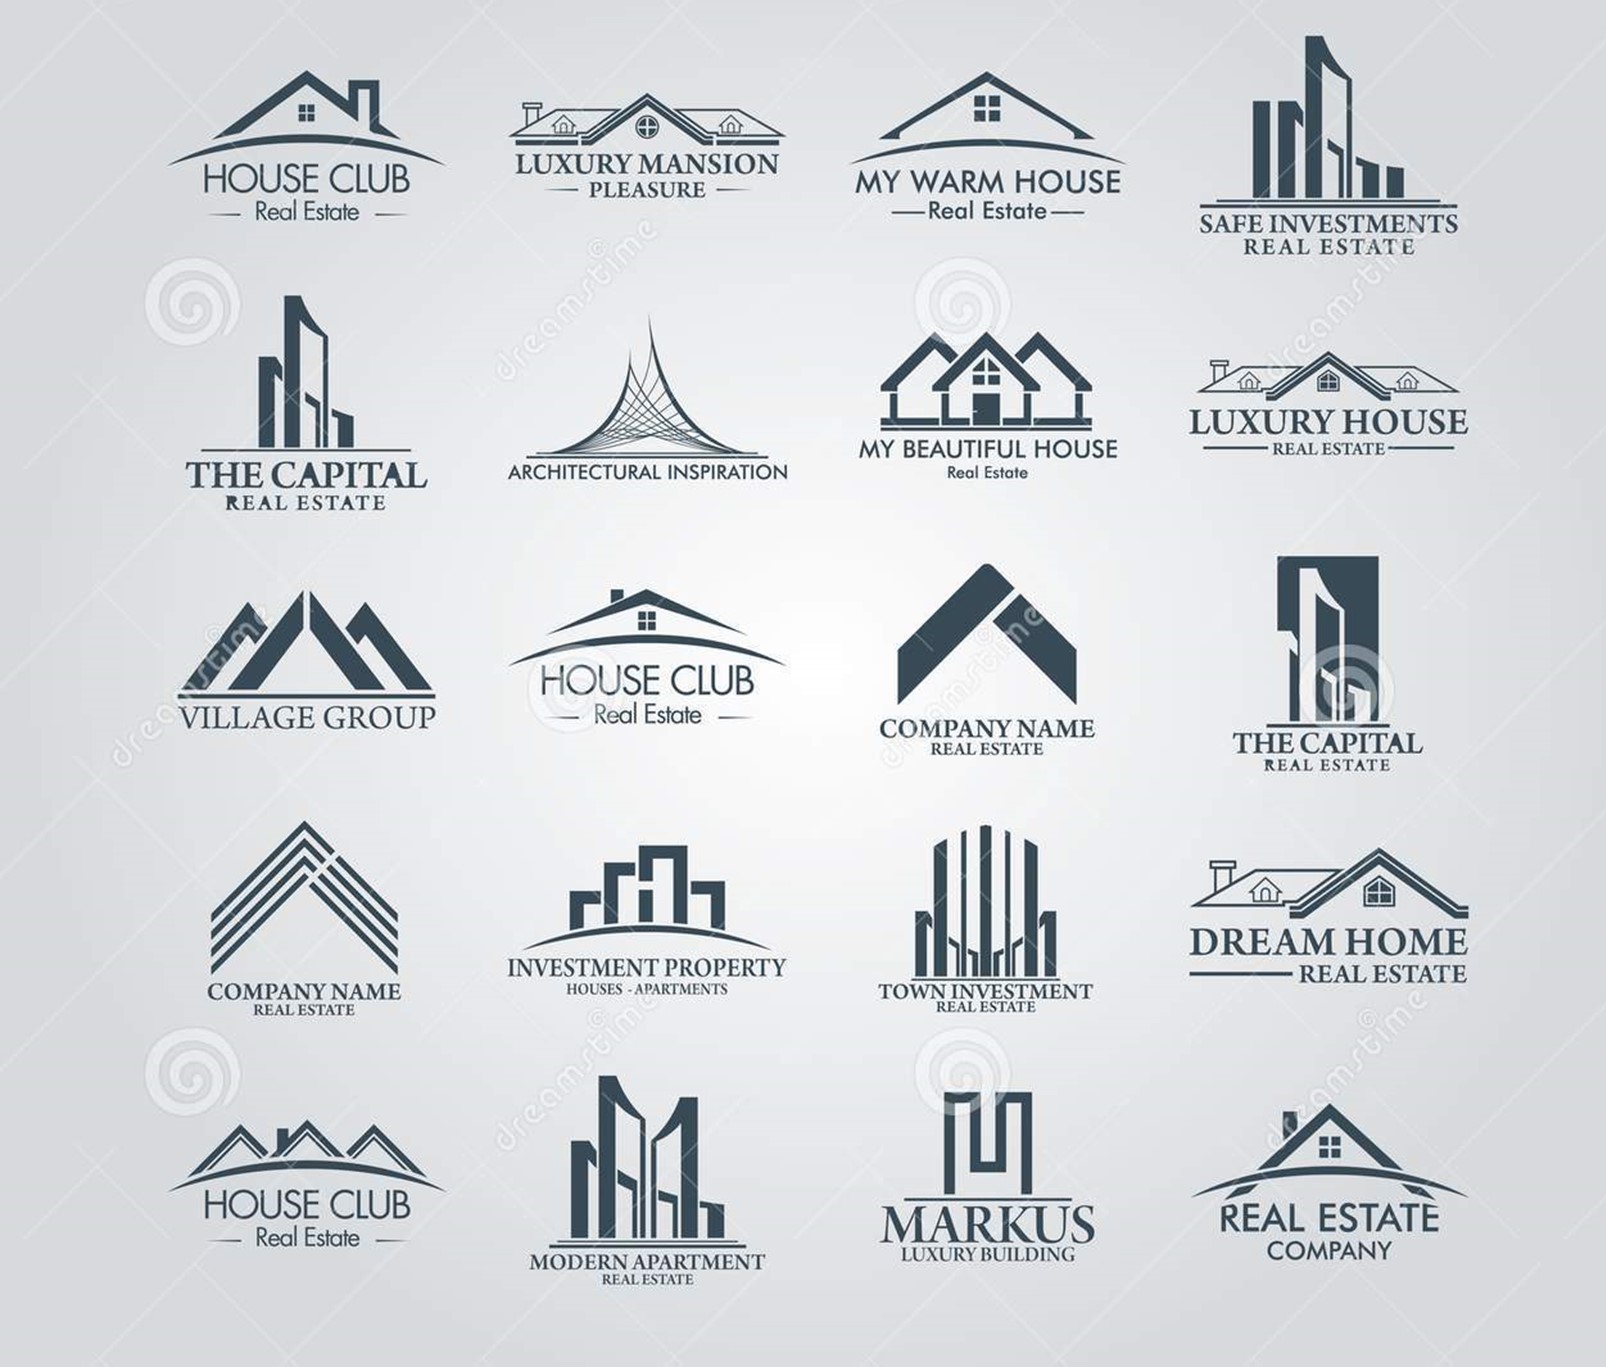 Solid Ideas For Construction Logos and Companies